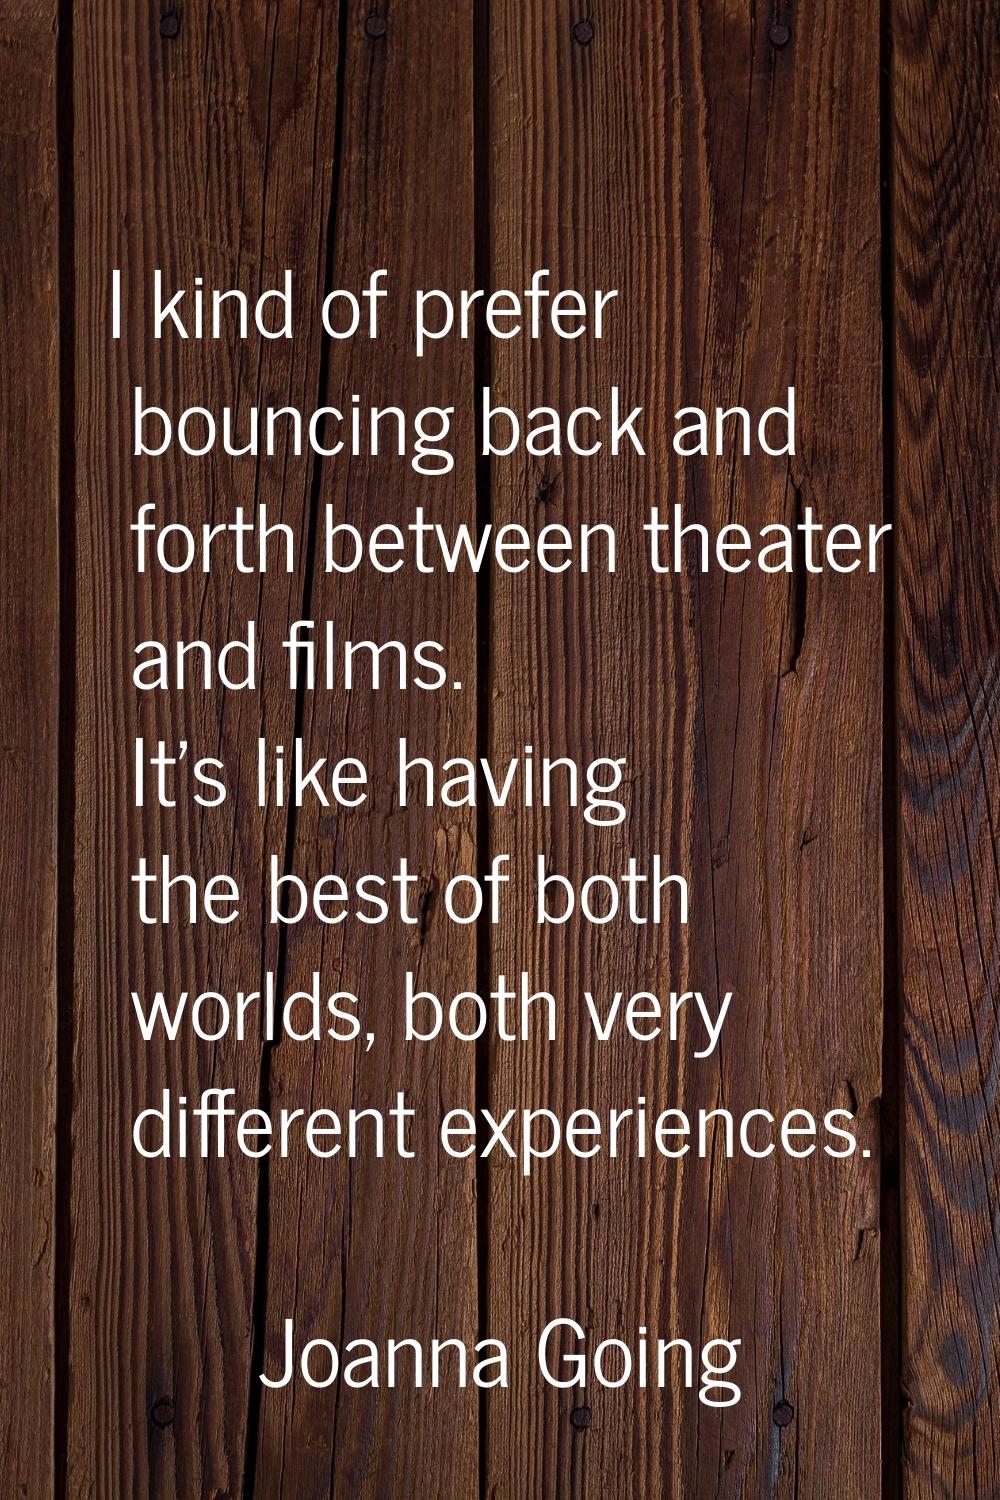 I kind of prefer bouncing back and forth between theater and films. It's like having the best of bo